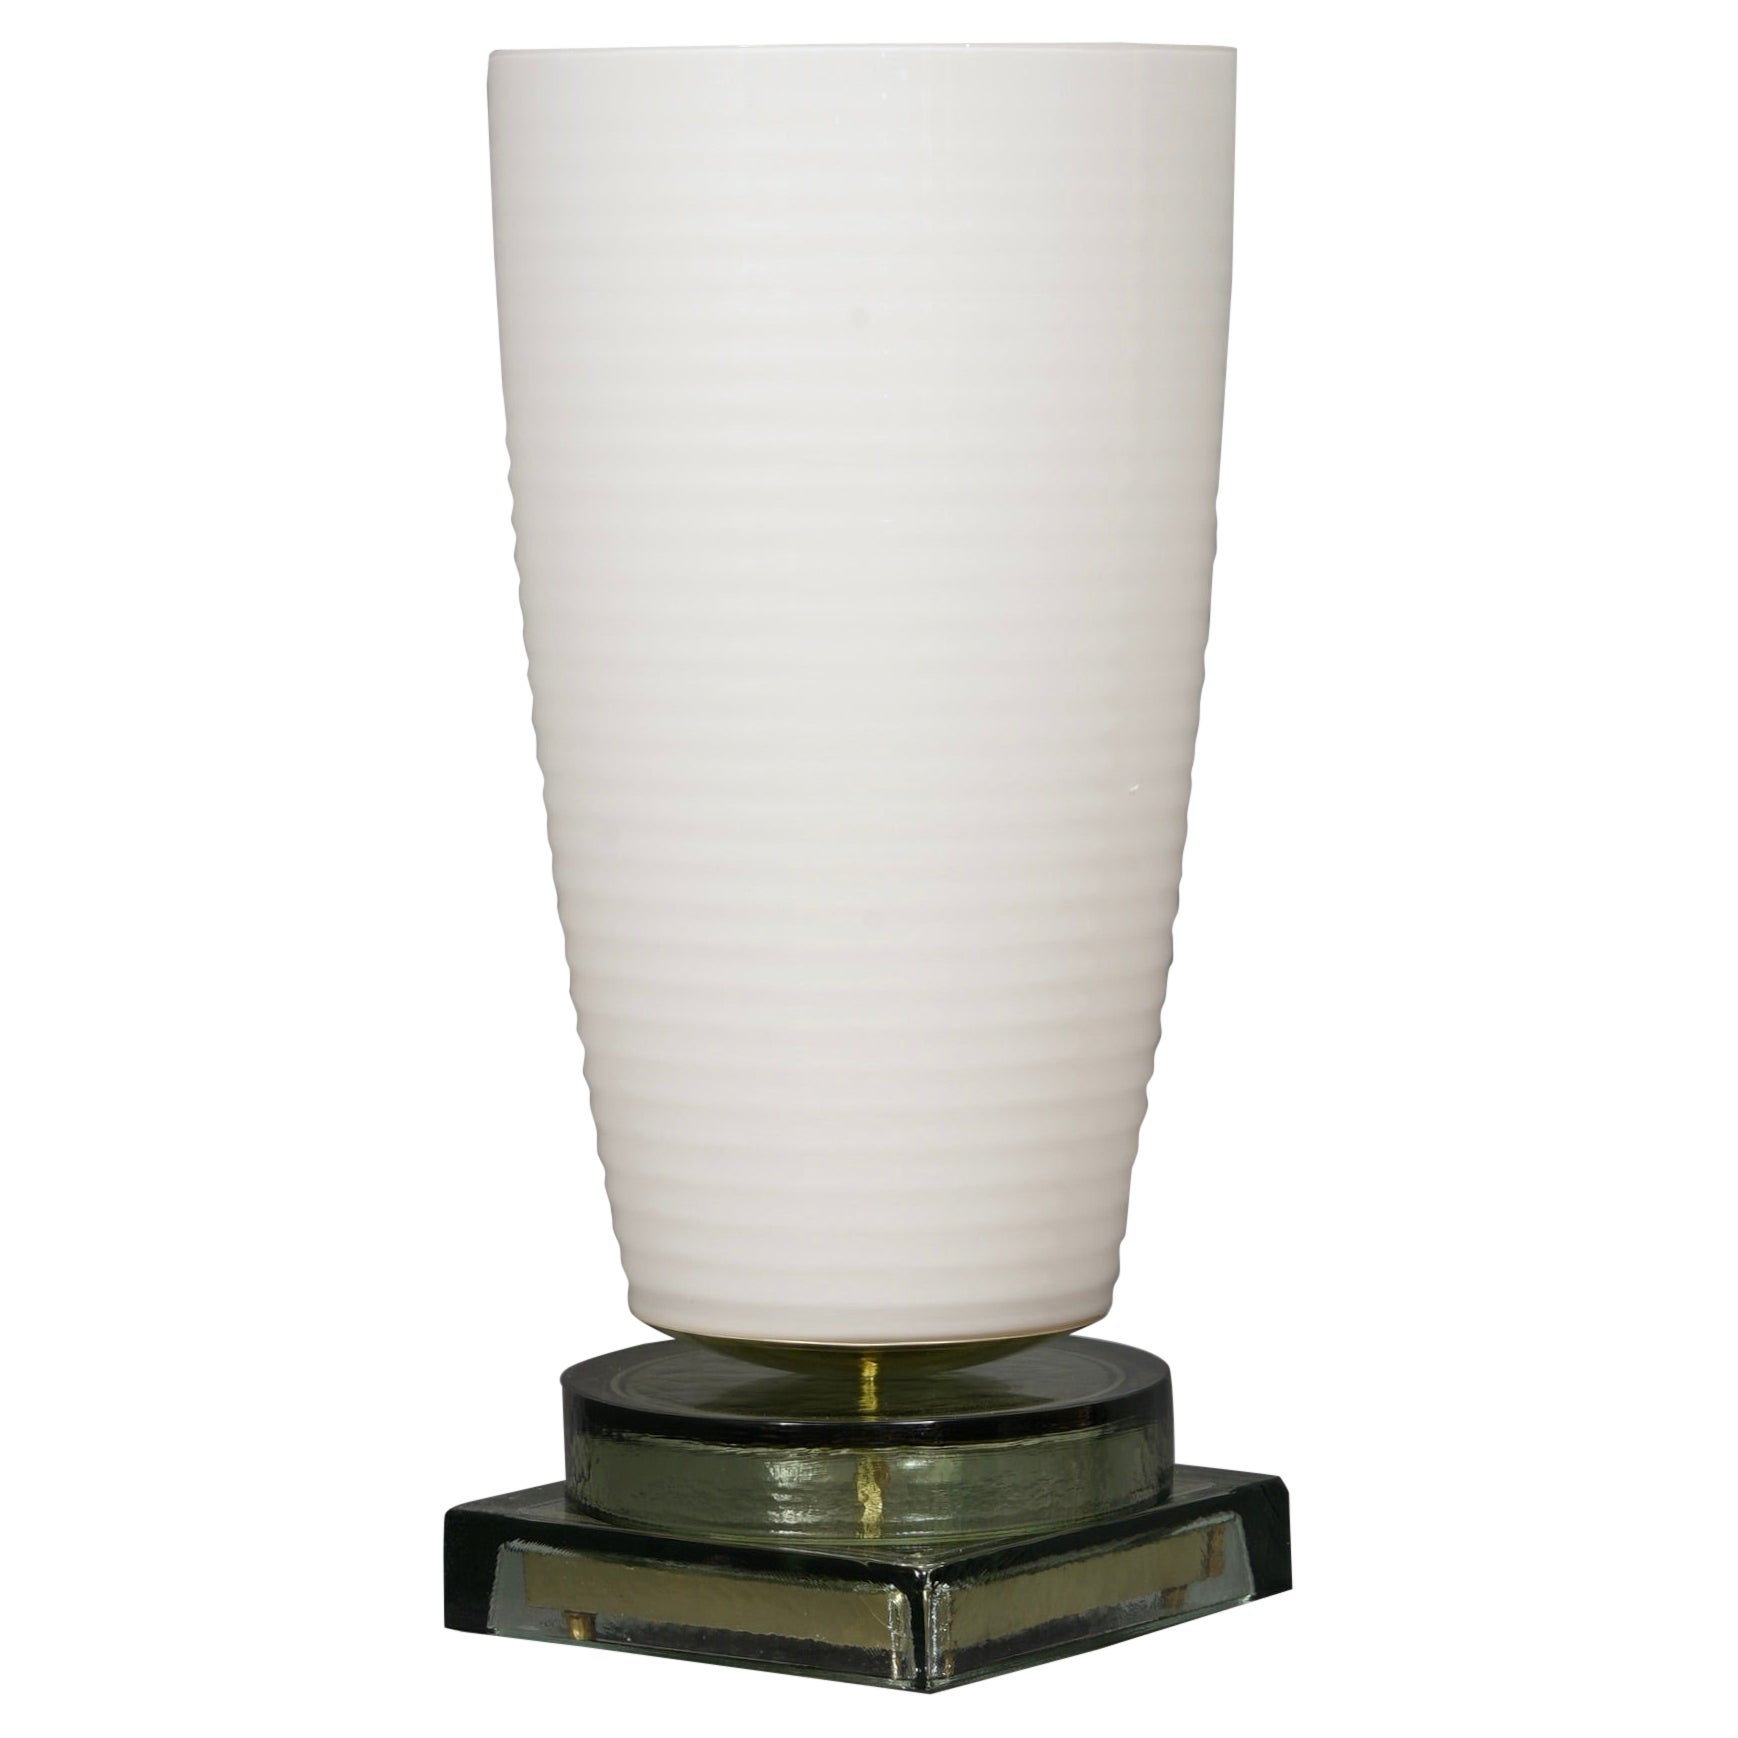 Murano in Style of Vistosi Blown White Glass and Brass Table Lamp, 1980